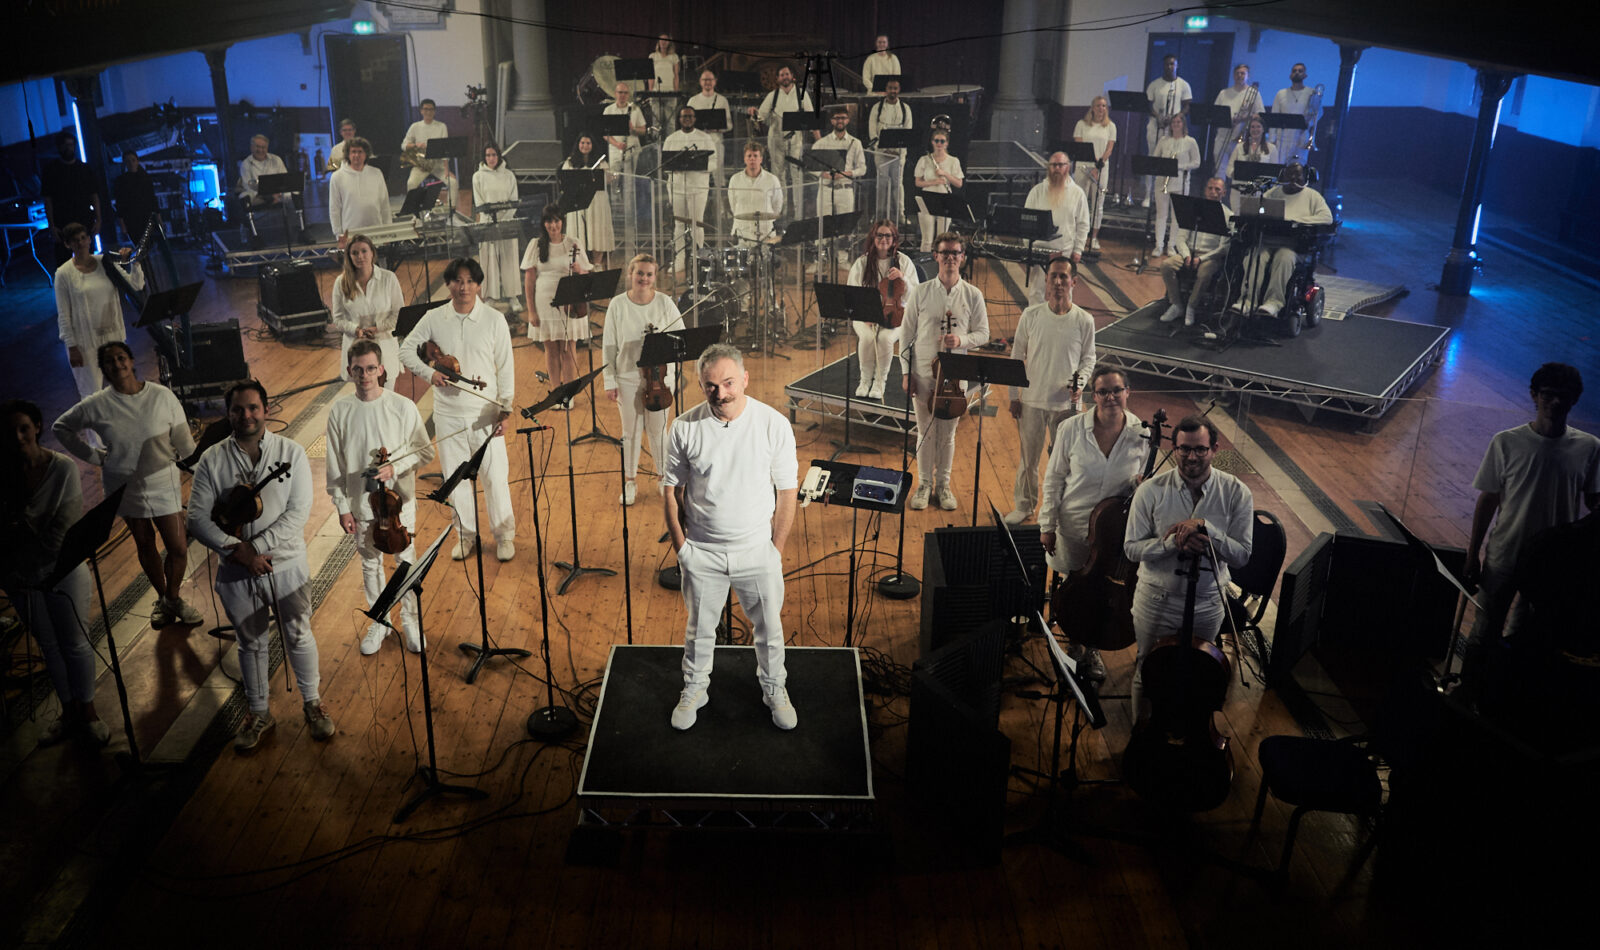 Charles Hazlewood, a man in his fifties with white-grey hair and moustache, stands confidently on a square riser in the centre of a performance hall, looking up confidently at the camera with one eyebrow slightly raised. Surrounding him are Paraorchestra musicians holding or sitting at their instruments and smiling. Both Charles and the musicans are dressed entirely in white.